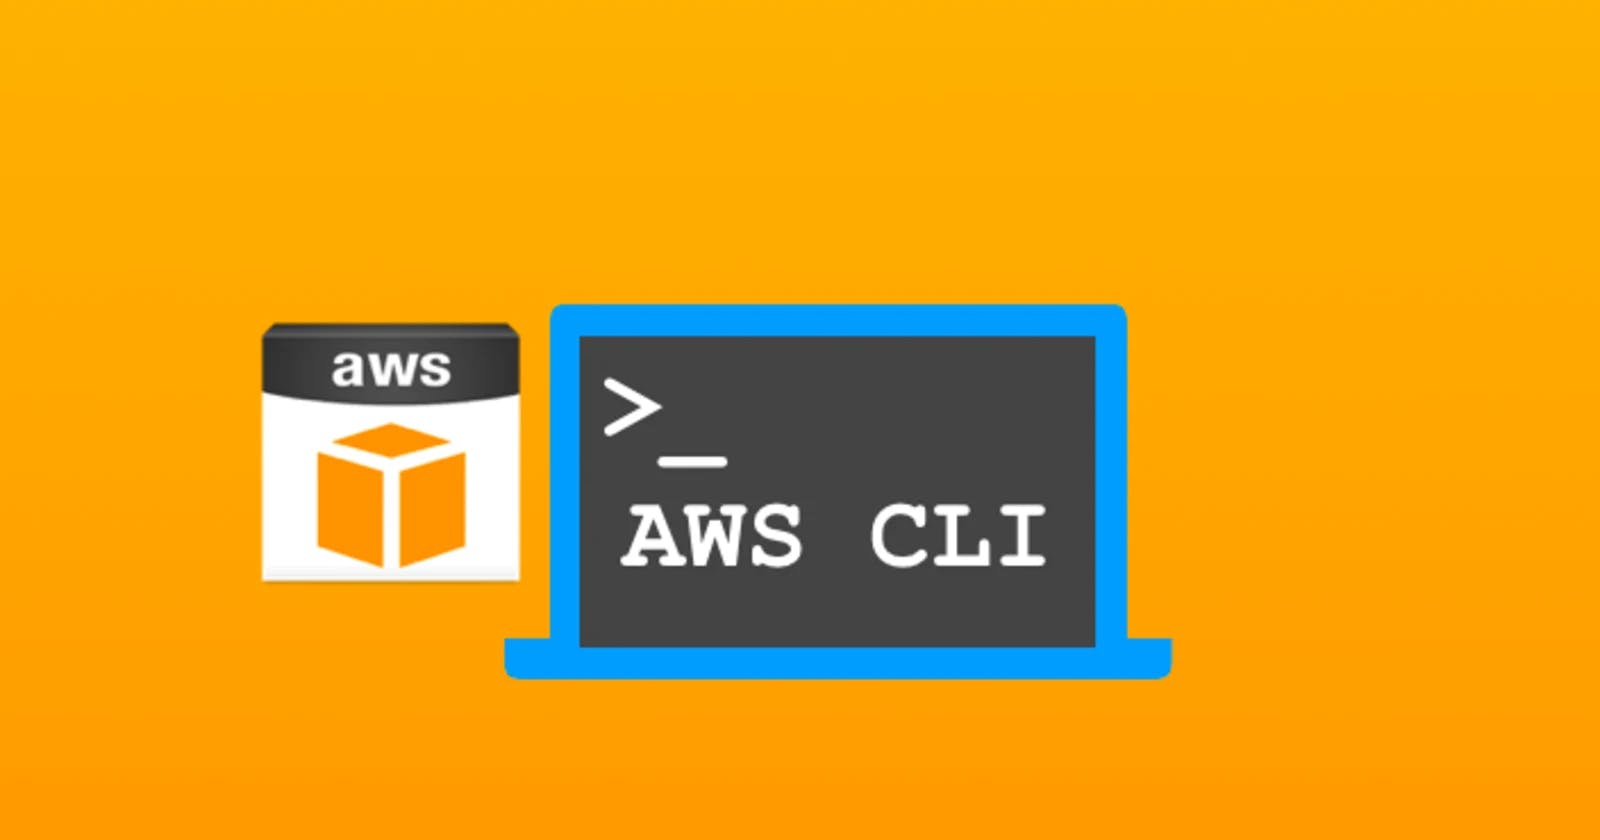 Day 26: S3 Programmatic Access with AWS-CLI 💻 📁